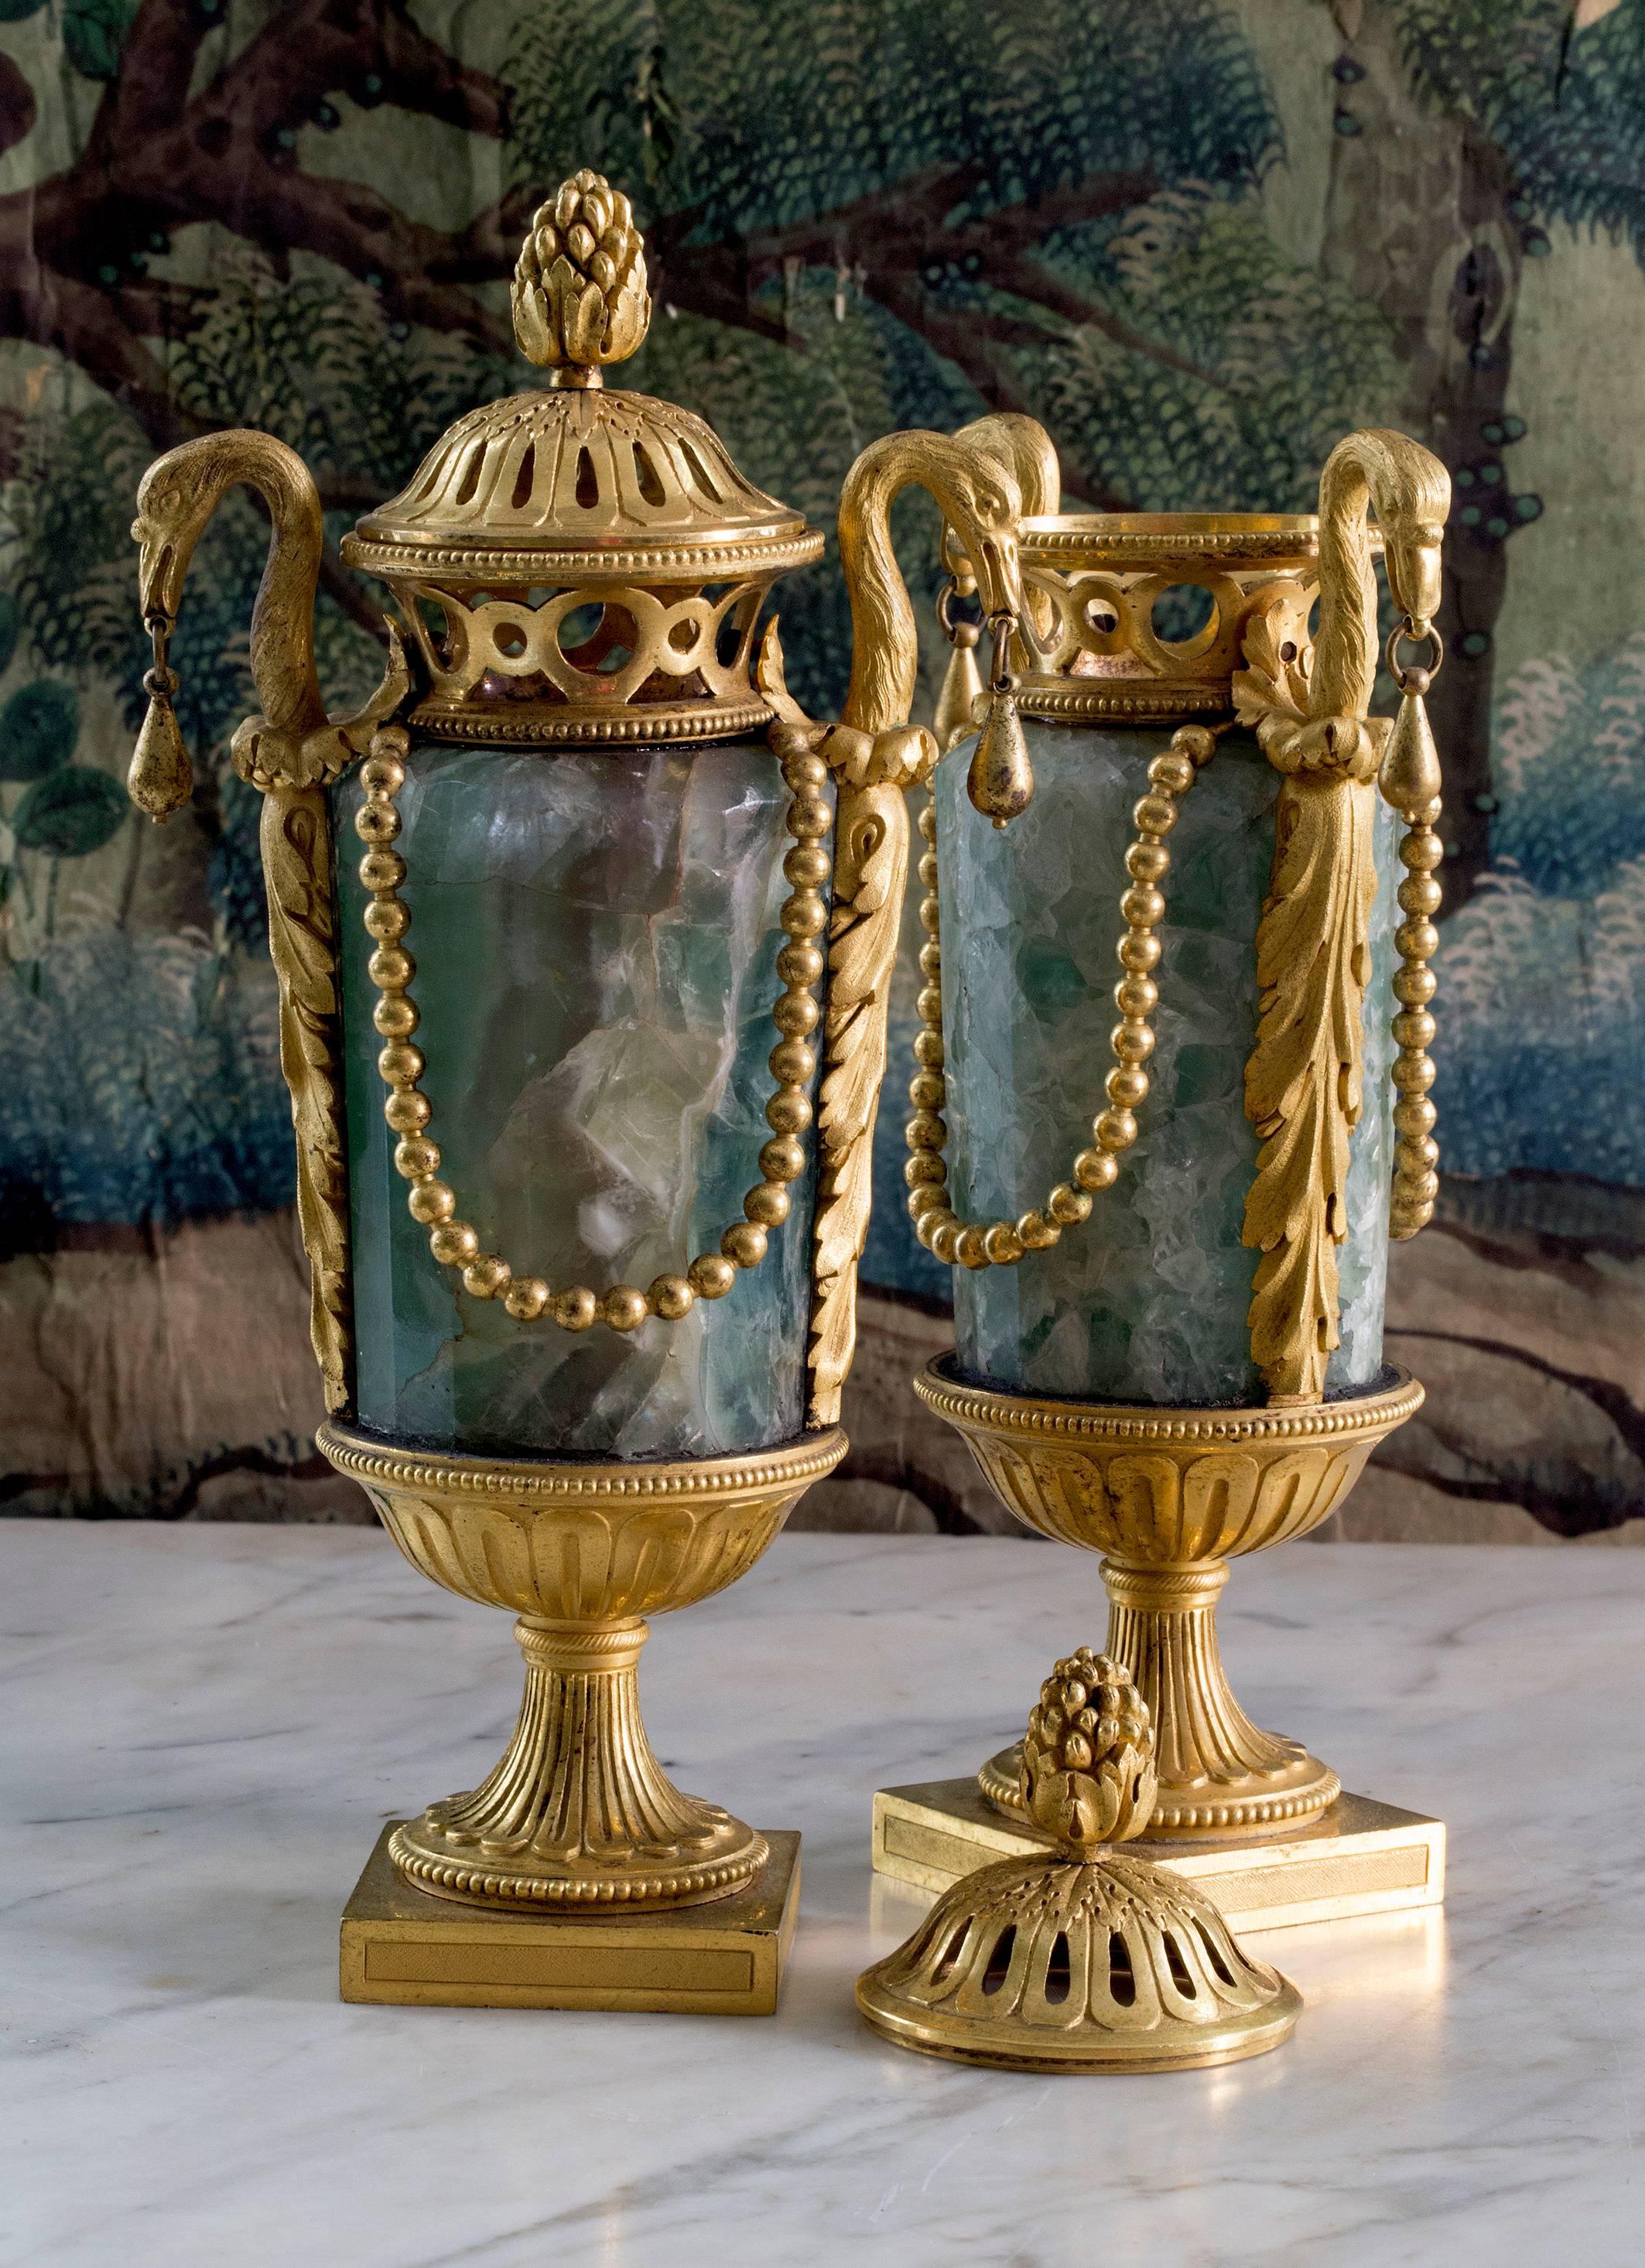 A precious pair of Louis XVI Blue John "pot-pourri" vases richly mounted with swan-shaped handles, France, Louis XVI period, circa 1785.

Blue John is a semi-precious mineral, a beautiful form of fluorite with colors ranging from